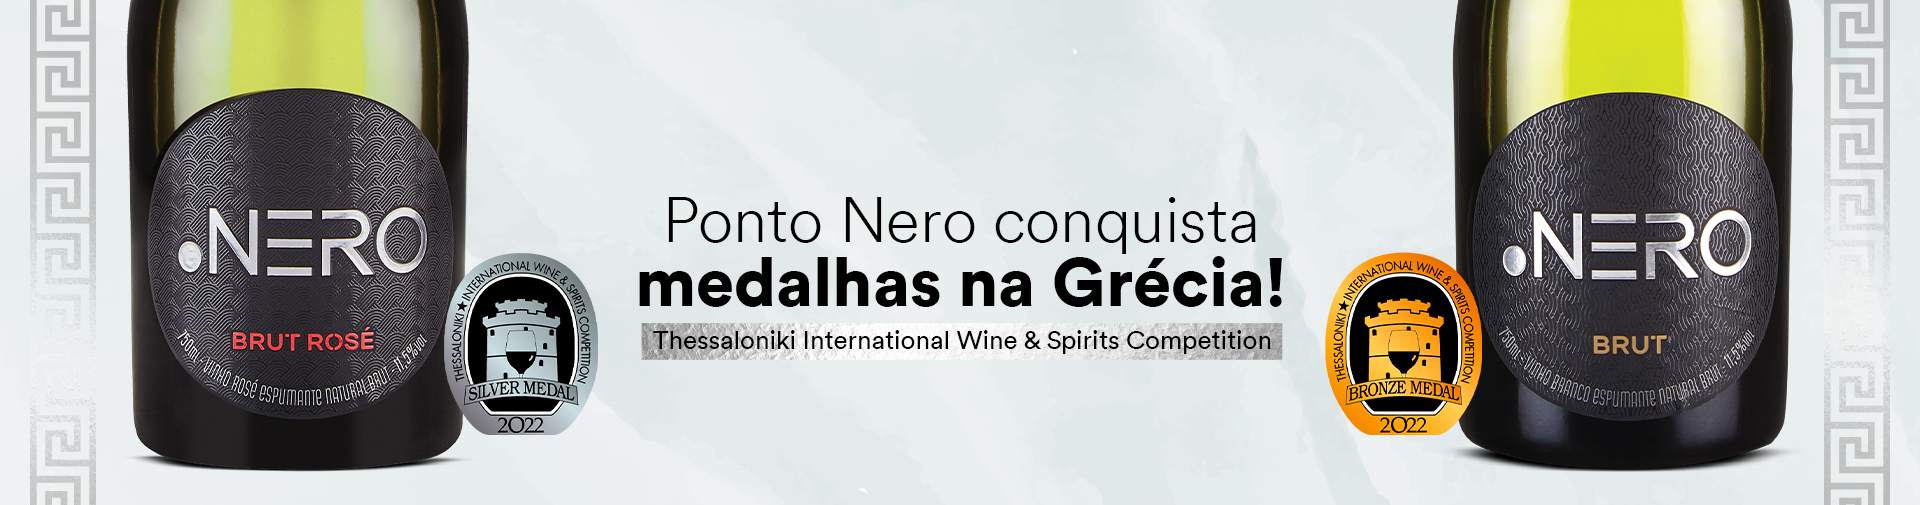 Ponto Nero - Banner Site 1920x505px.png